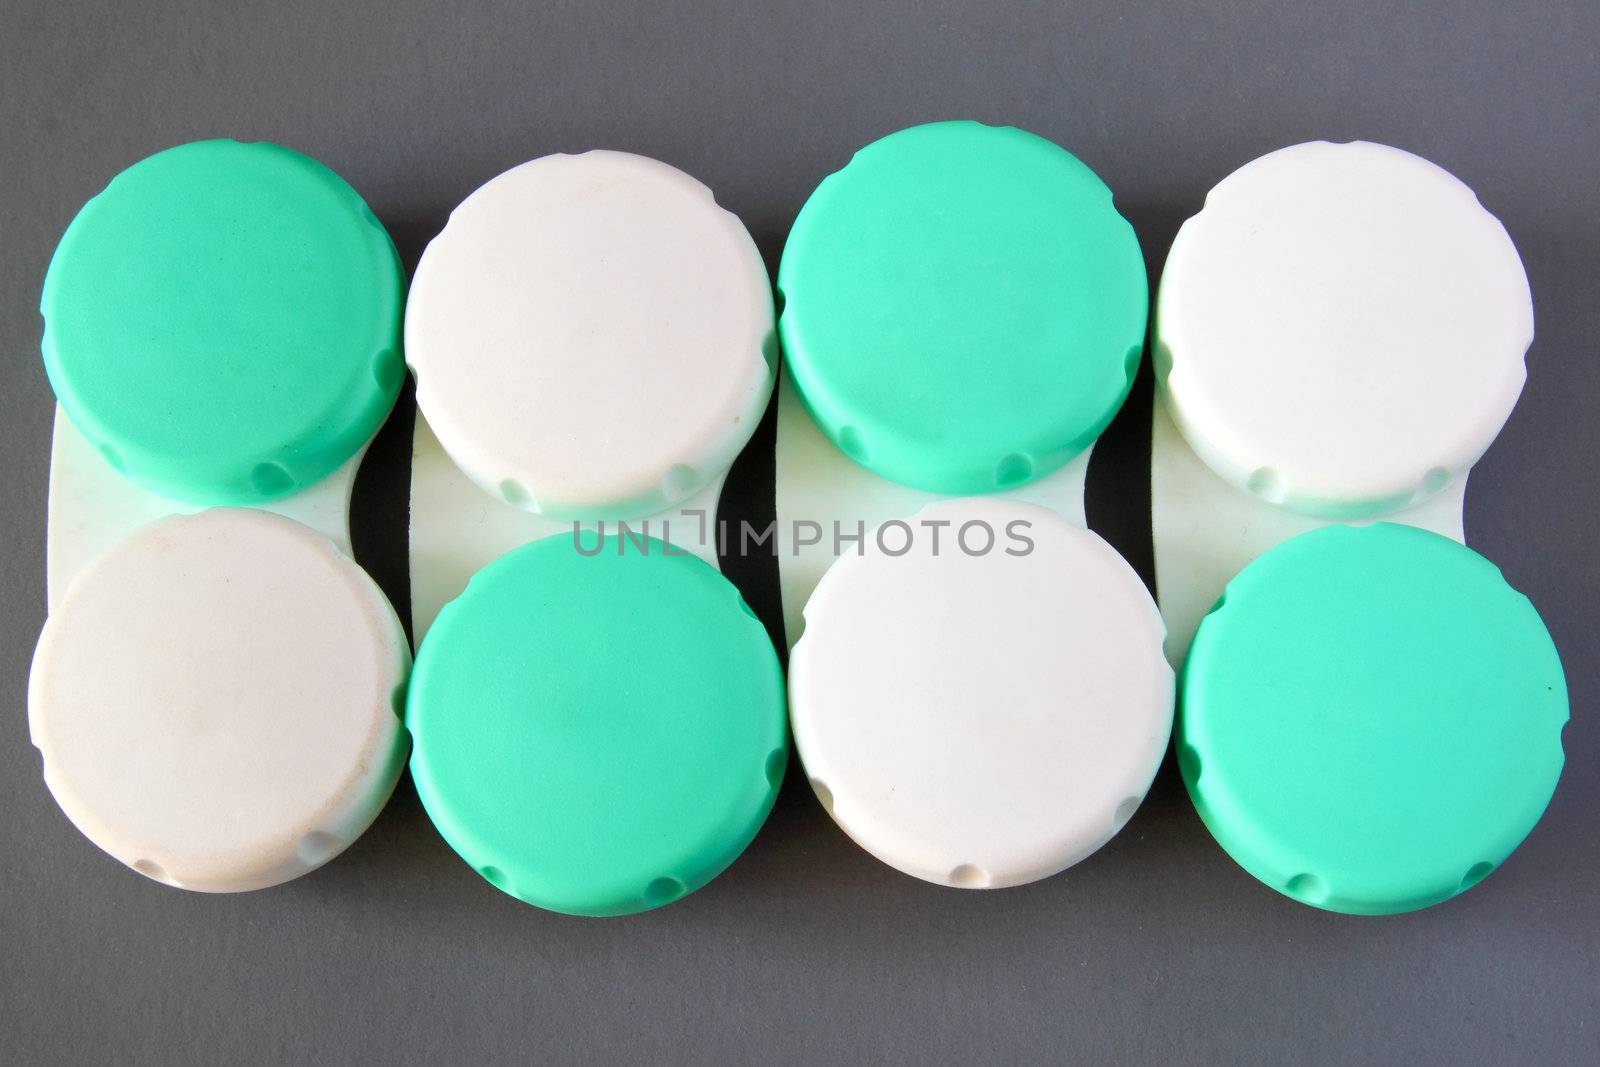 Contact Lens Container by nuchylee